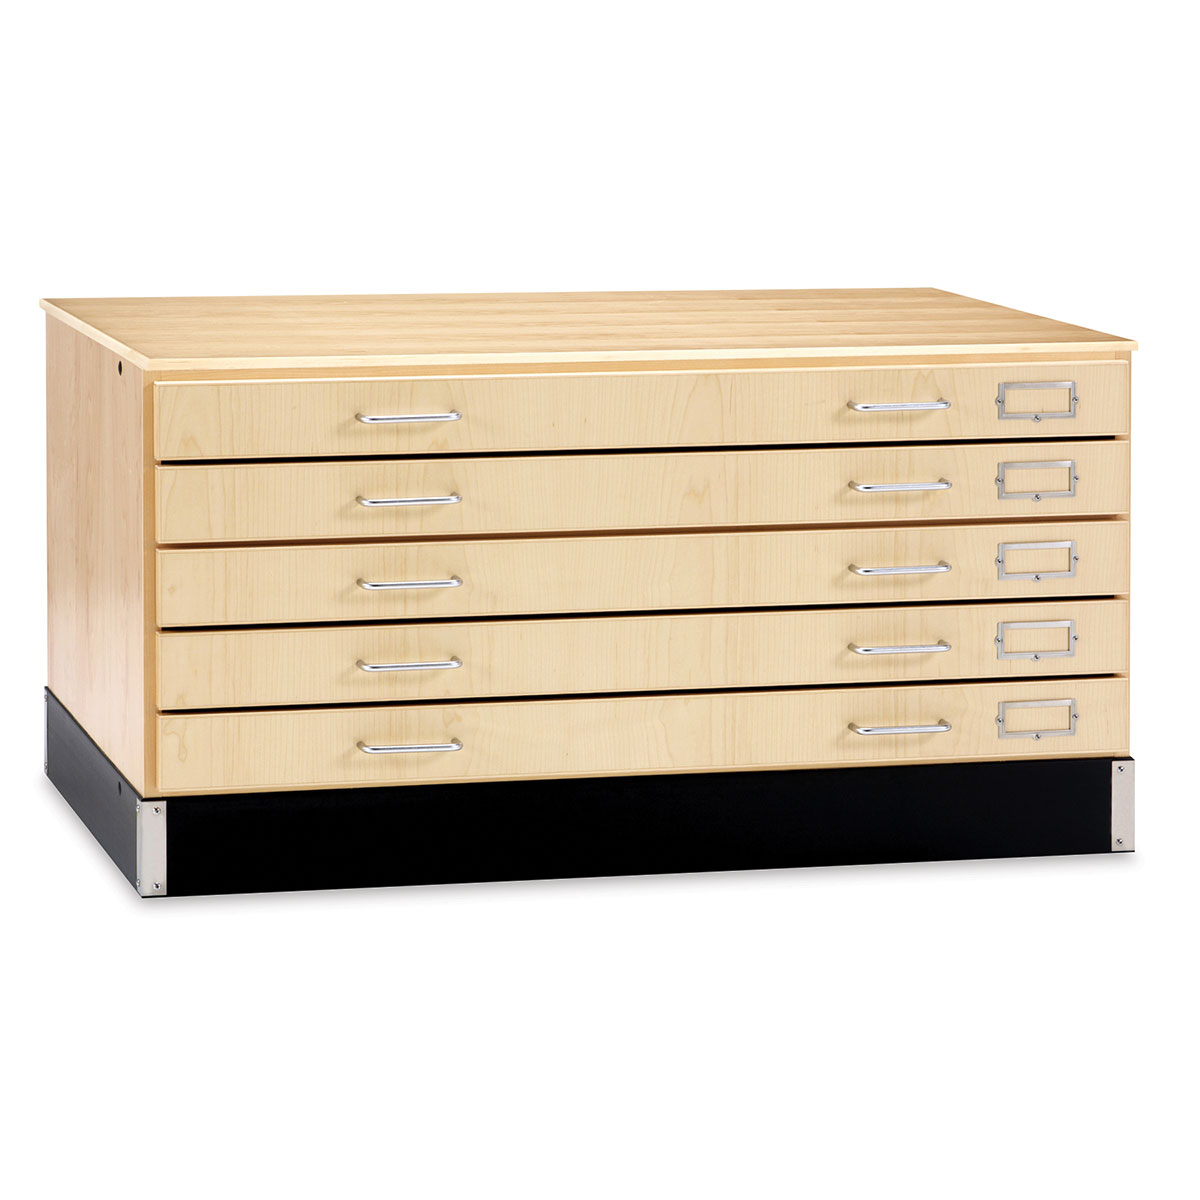 OFFEX Flat File Storage Folders Stores Flat Items up to 12 in. x